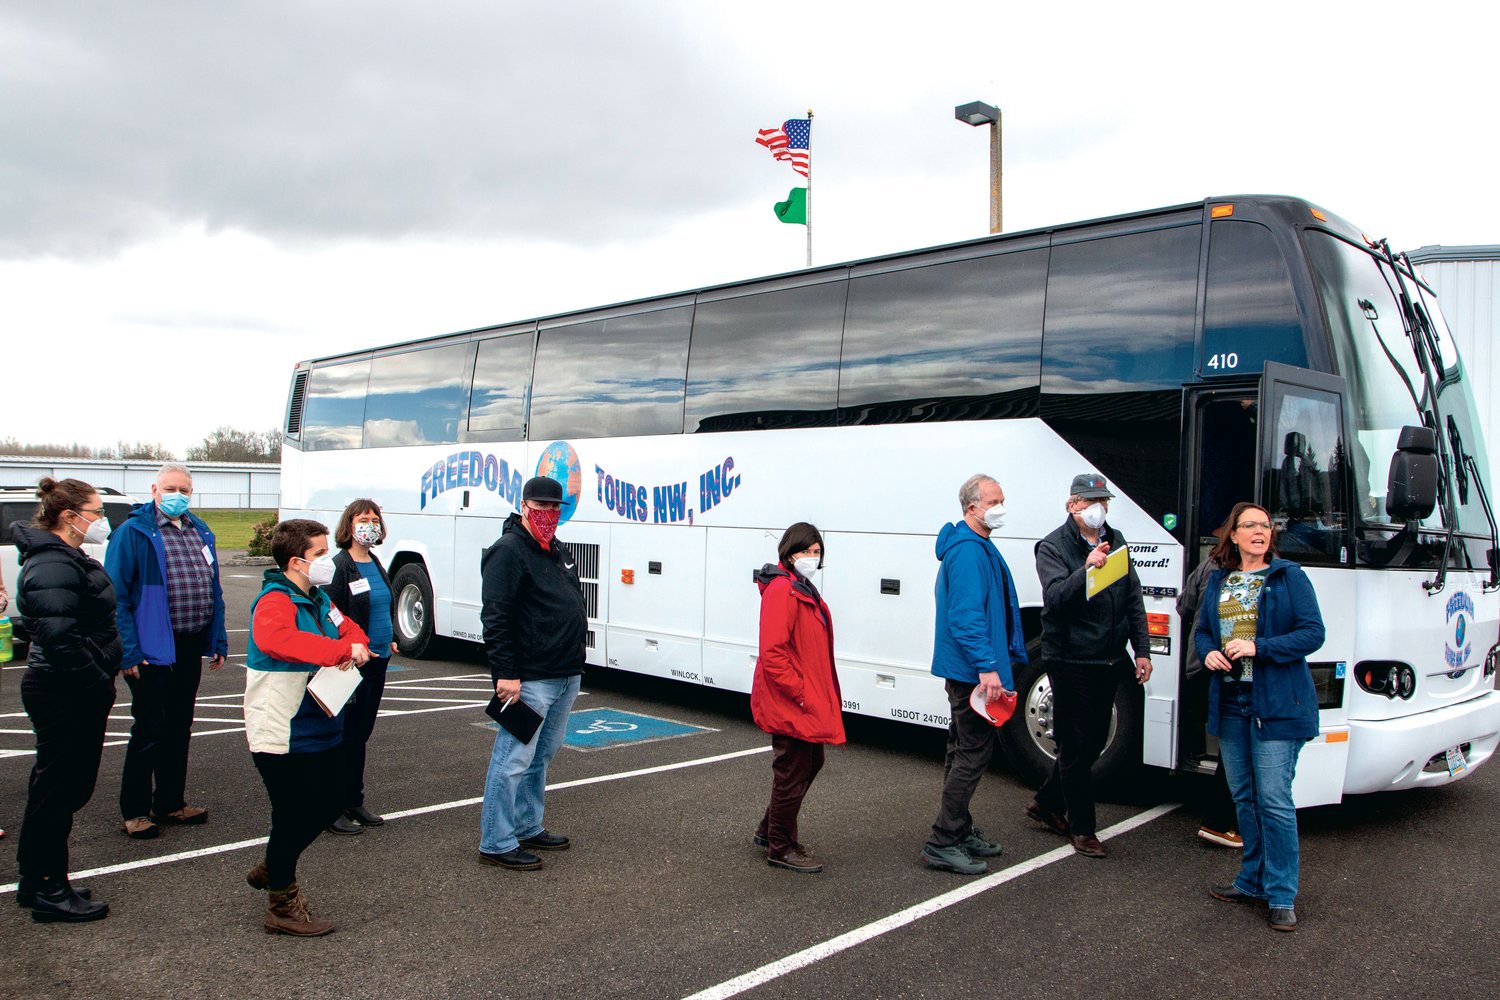 The tour group boards the bus after completing a stop at the Chehalis-Centralia Airport.